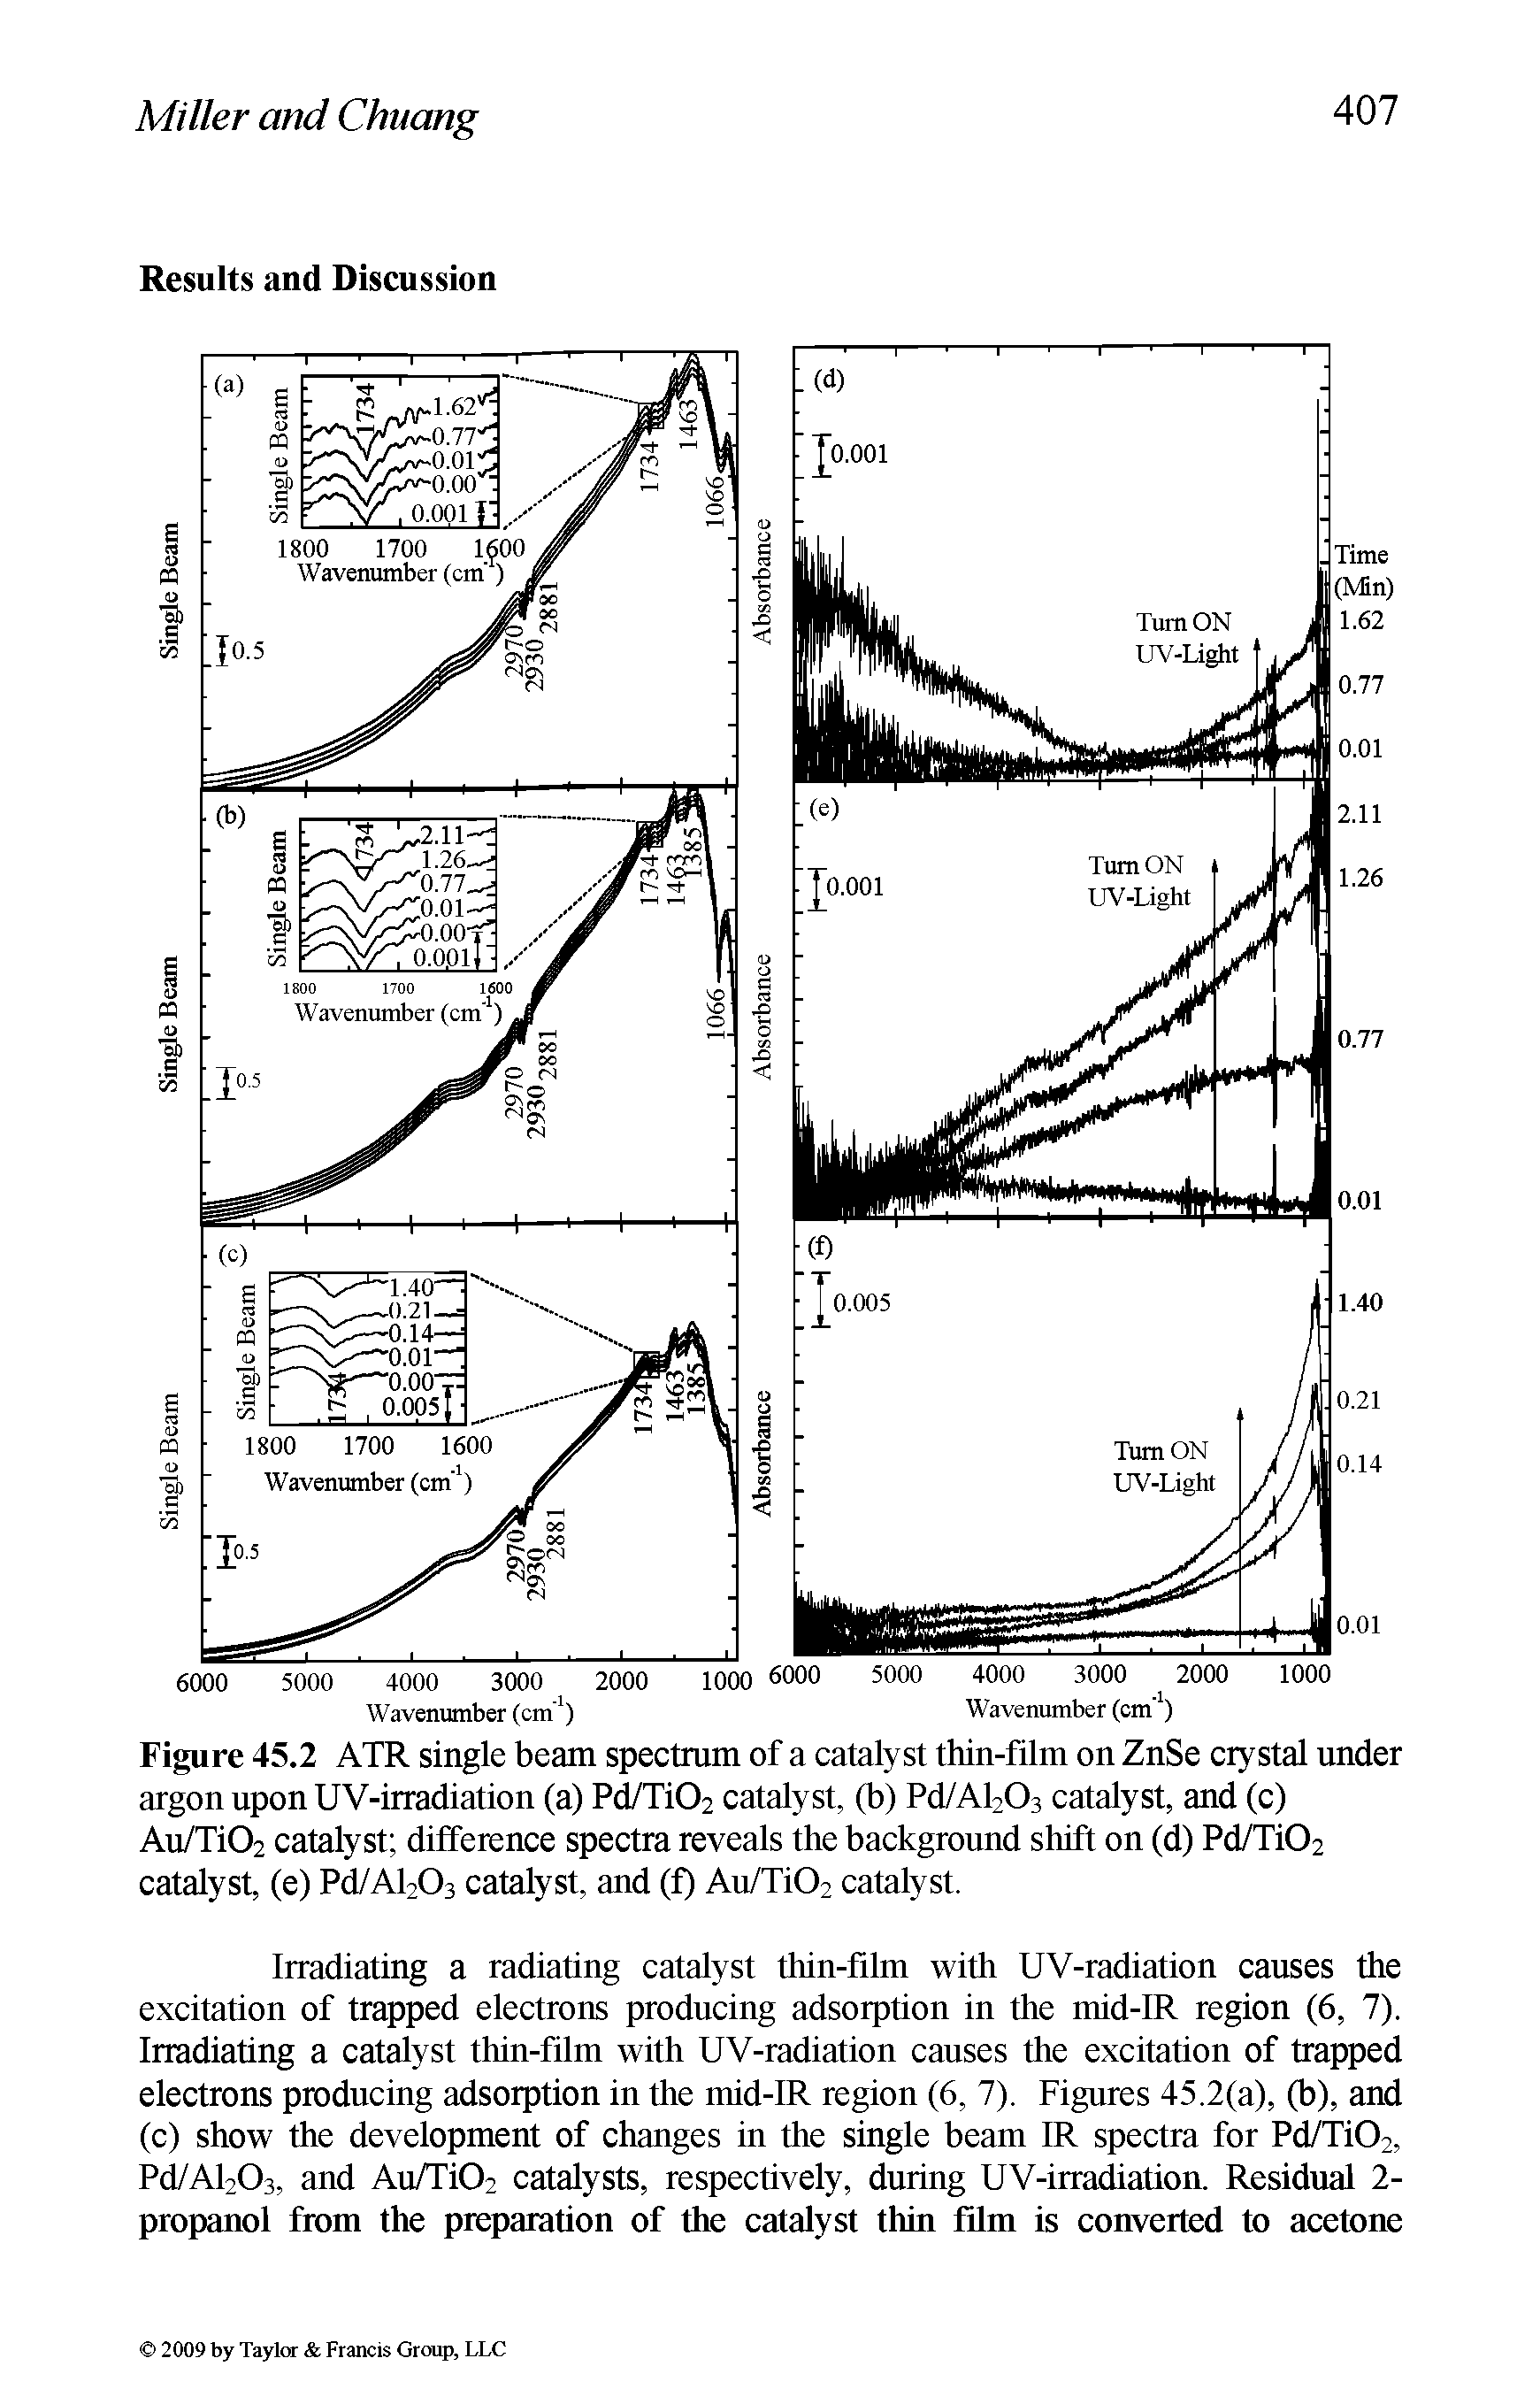 Figure 45.2 ATR single beam spectmm of a catalyst thin-film on ZnSe crystal under argon upon UV-irradiation (a) P Ti02 catalyst, (b) Pd/AbOs catalyst, and (c) Au/T102 catalyst difference spectra reveals the background shift on (d) Pd/Ti02 catalyst, (e) Pd/Al203 catalyst, and (f) Au/Ti02 catalyst.